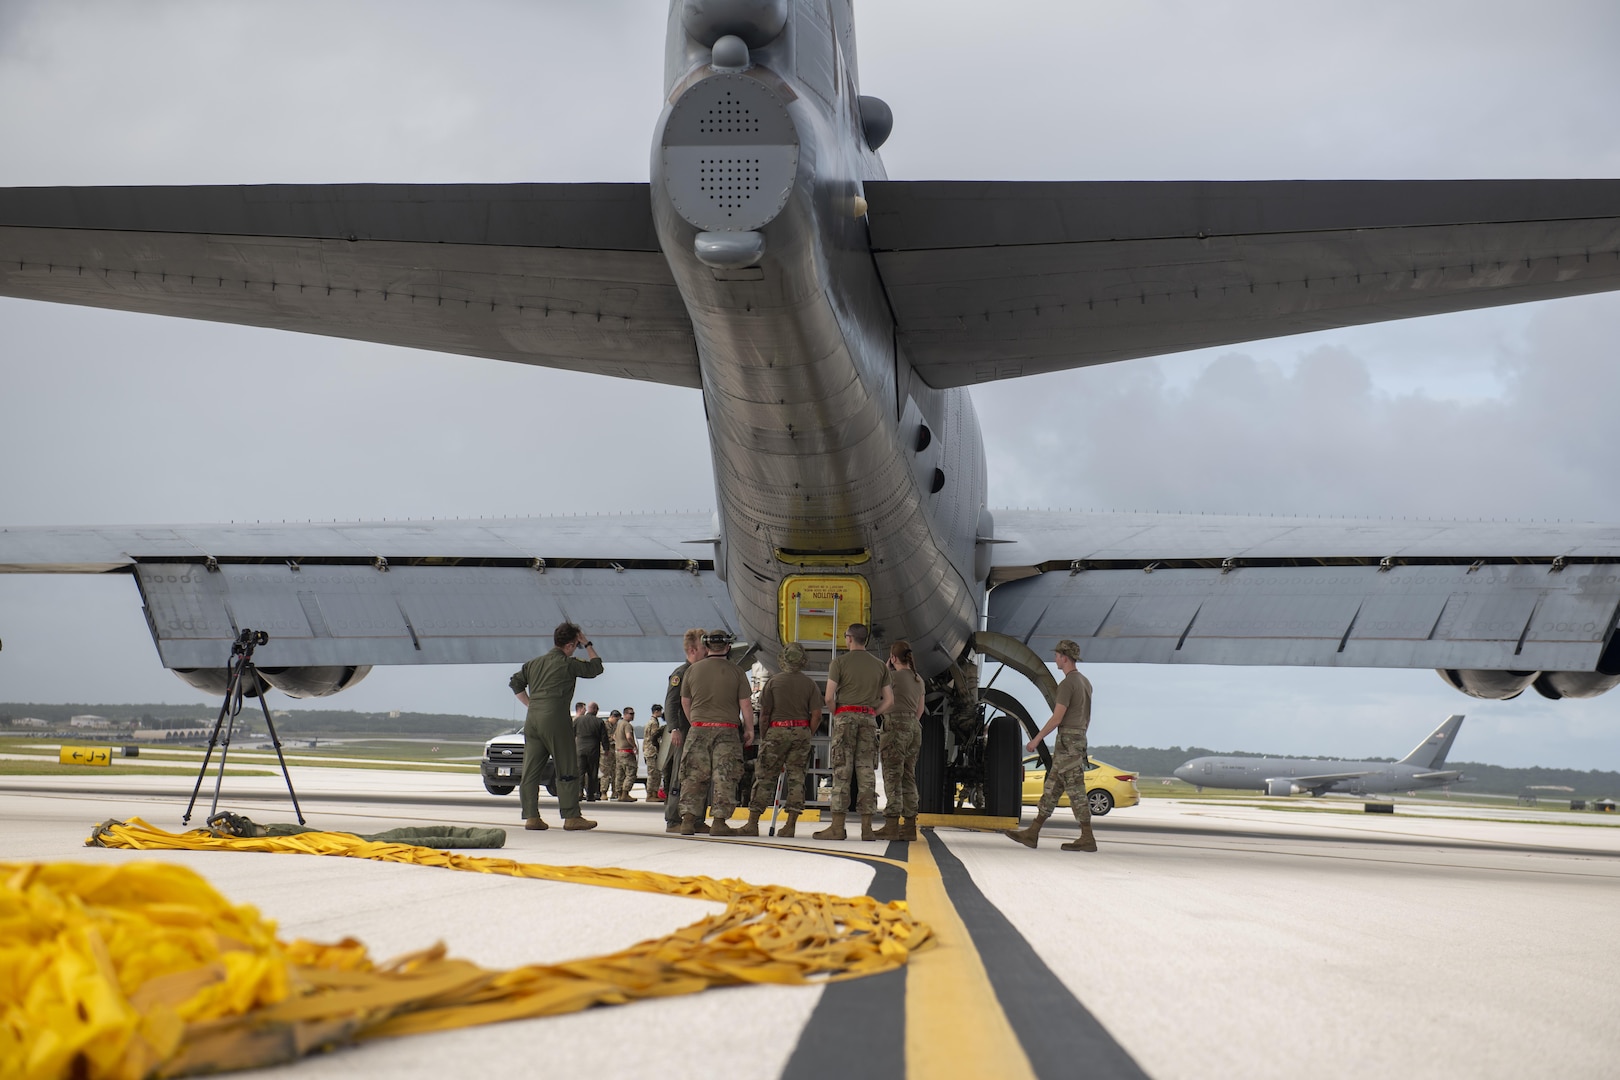 U.S. Air Force Airmen from the 96th Expeditionary Bomb Squadron unload a B-52 Stratofortress in support of a Bomber Task Force deployment at Andersen Air Force Base, Guam, Feb. 11, 2022. The U.S. routinely and visibly demonstrates commitment to its allies and partners through the global employment of our military forces. (U.S. Air Force photo by Staff Sgt. Lawrence Sena)